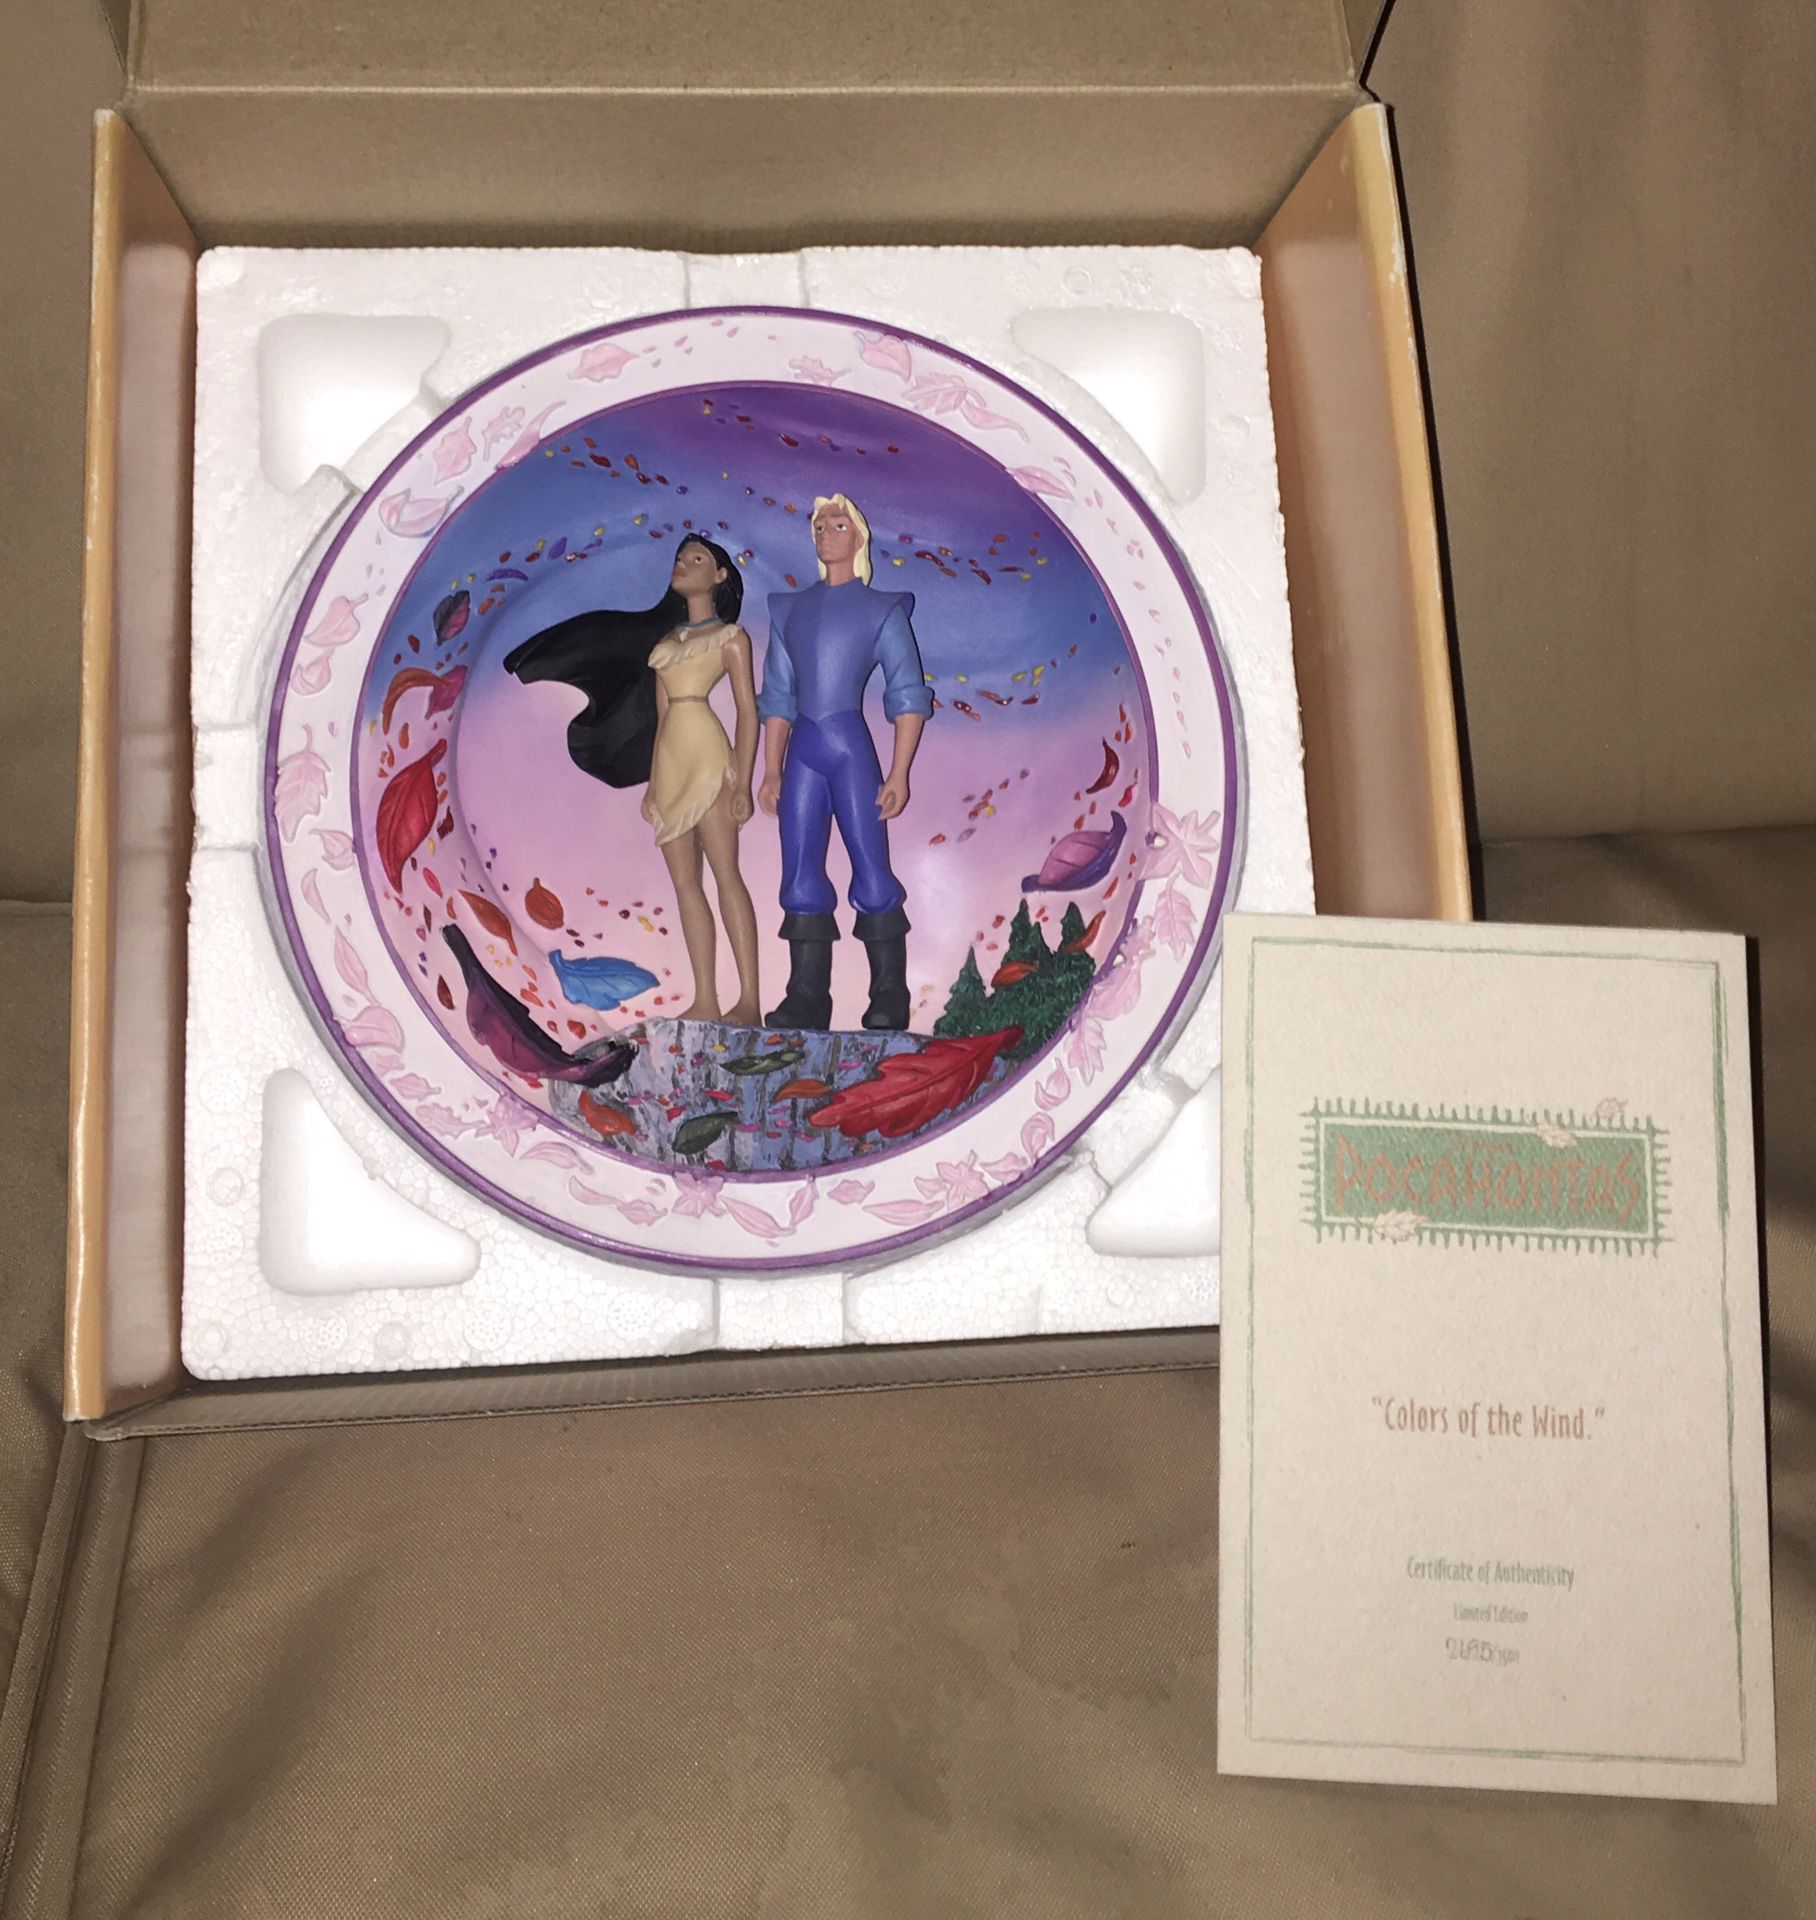 Pocahontas limited edition ‘Colors of the Wind’ collectible plate